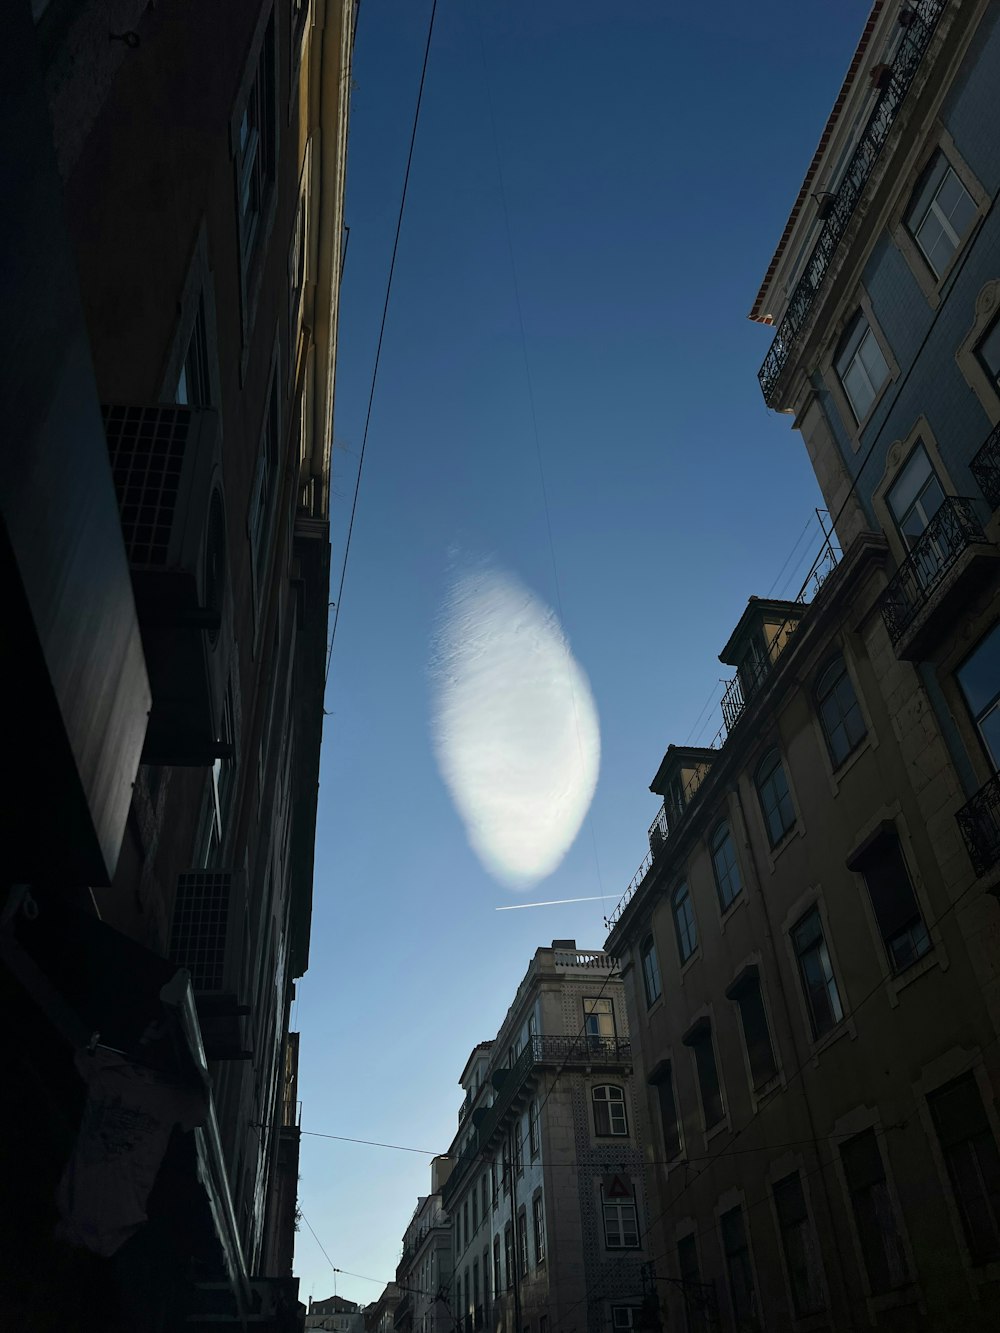 a street view of buildings and a contrail in the sky